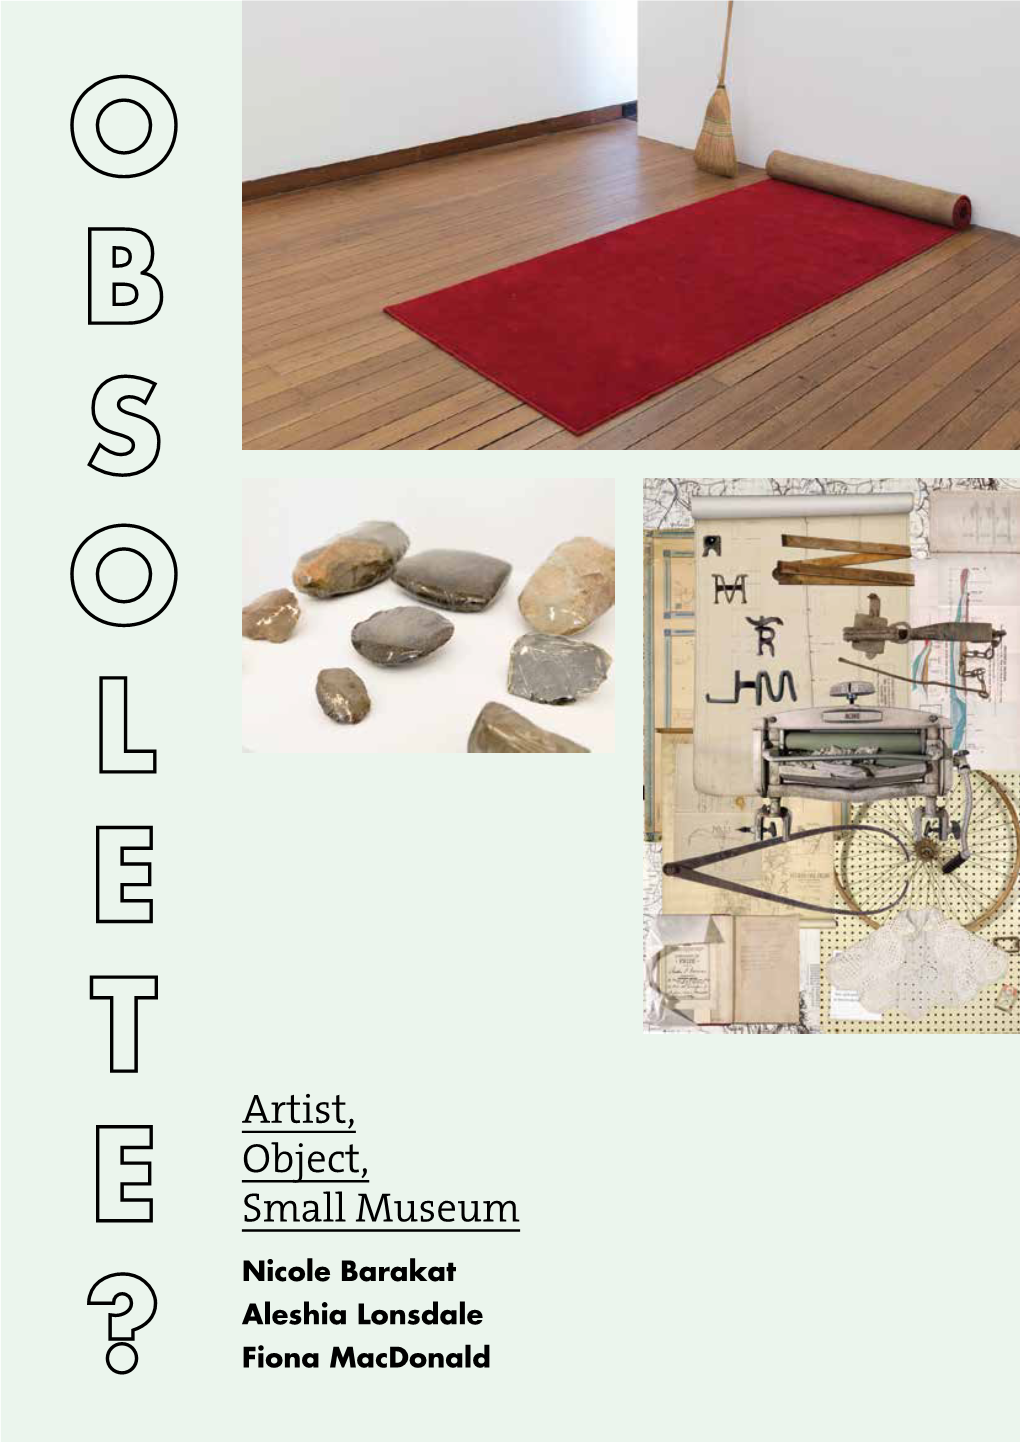 Artist, Object, Small Museum